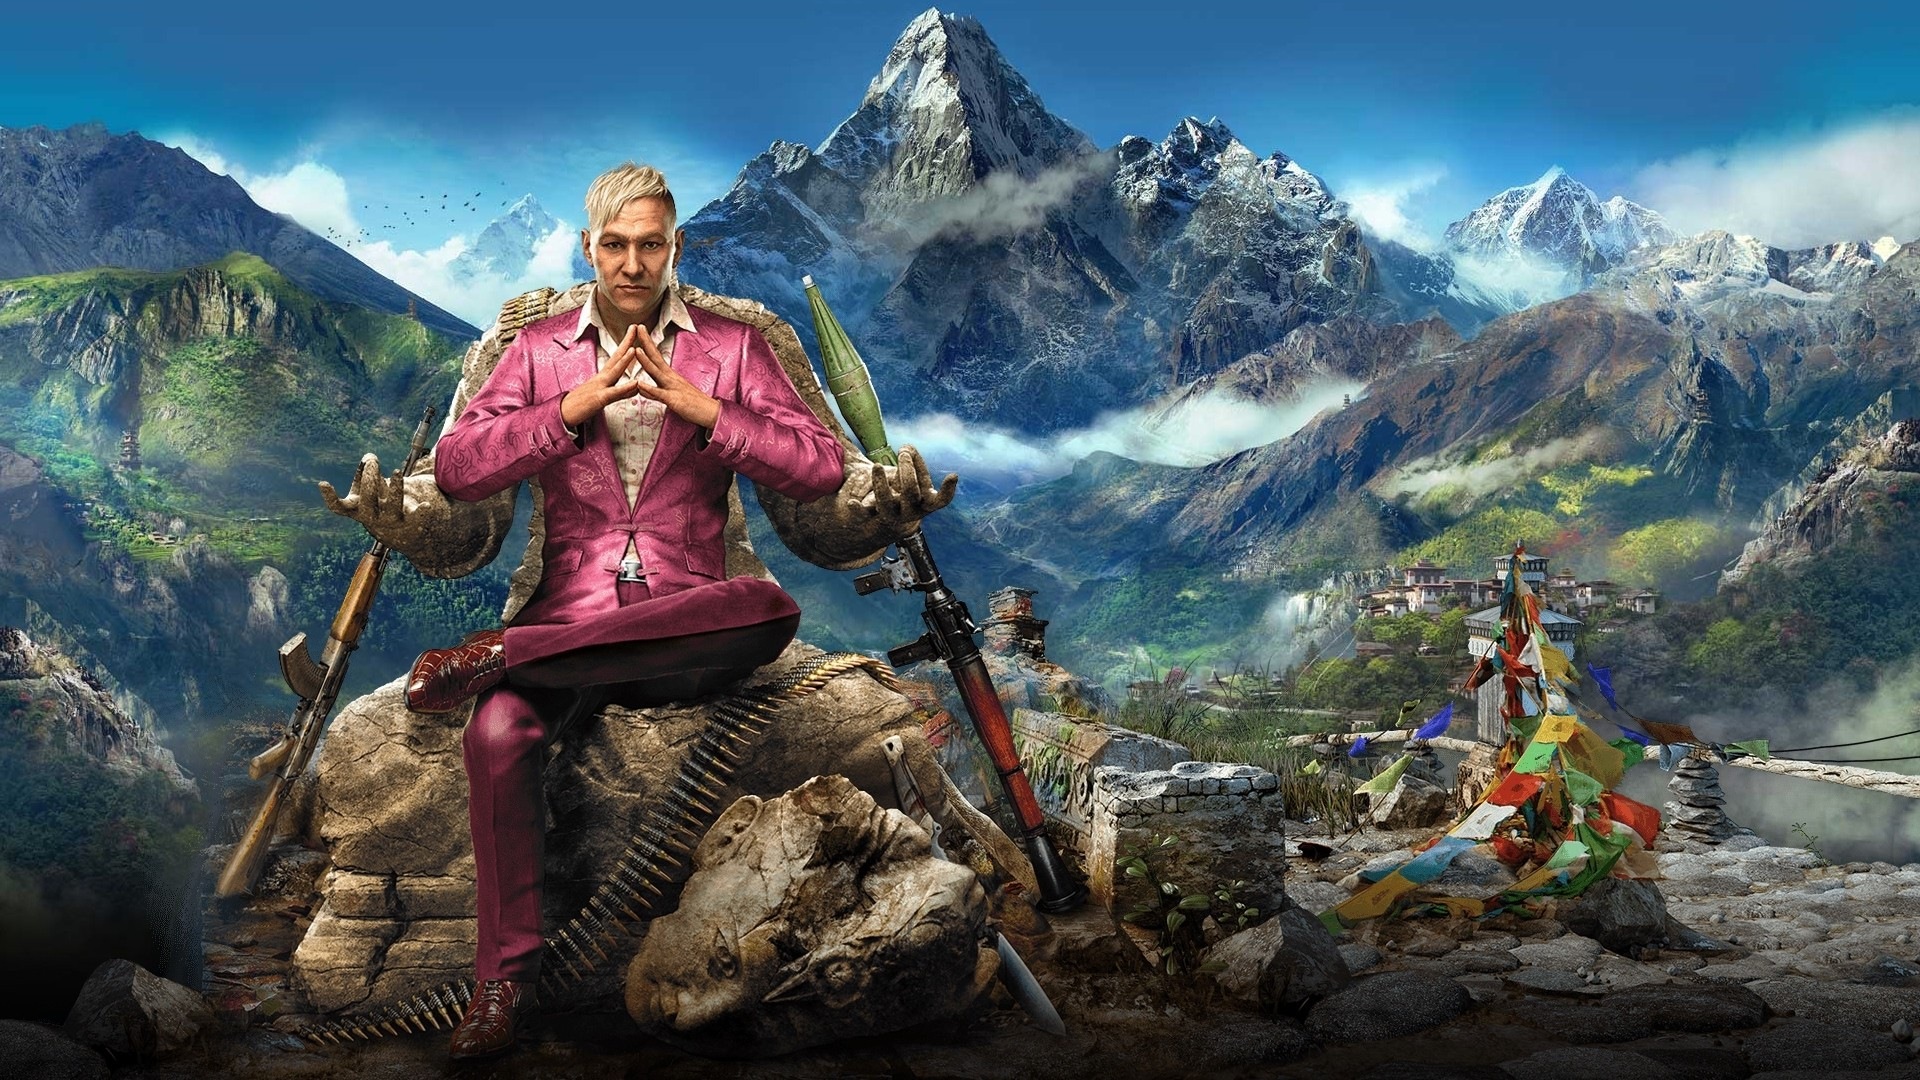 Far Cry 4 HD game wallpapers #4 - 1920x1080